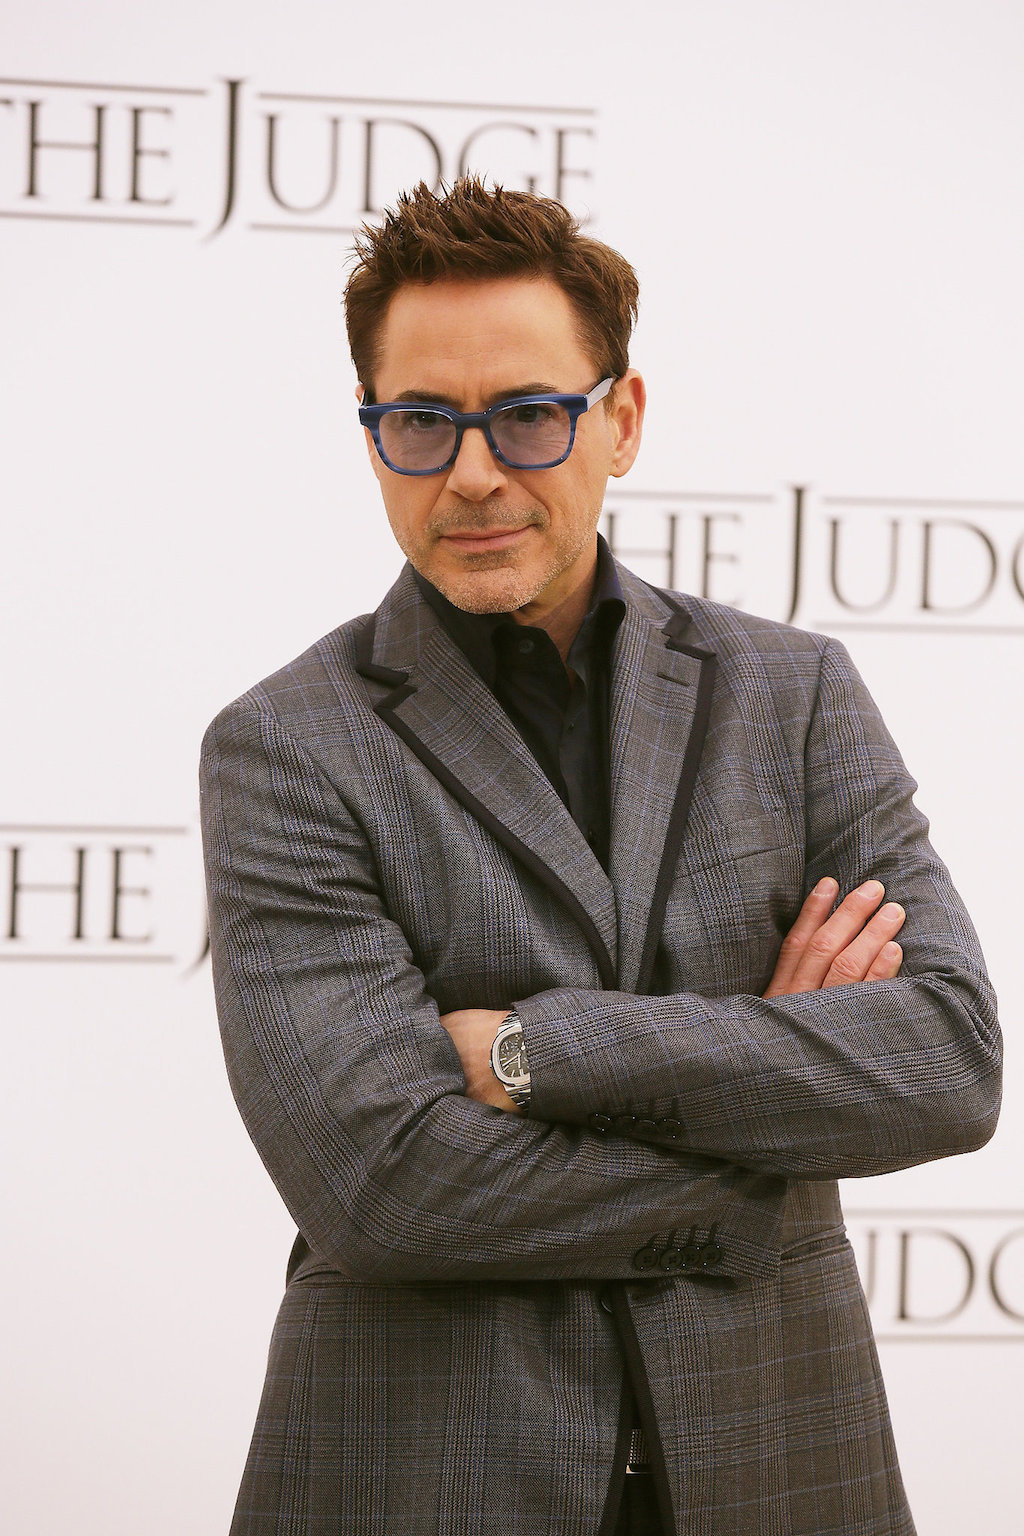 Robert-Downey-Jr-popped-up-Italy-Tuesday-night-premiere